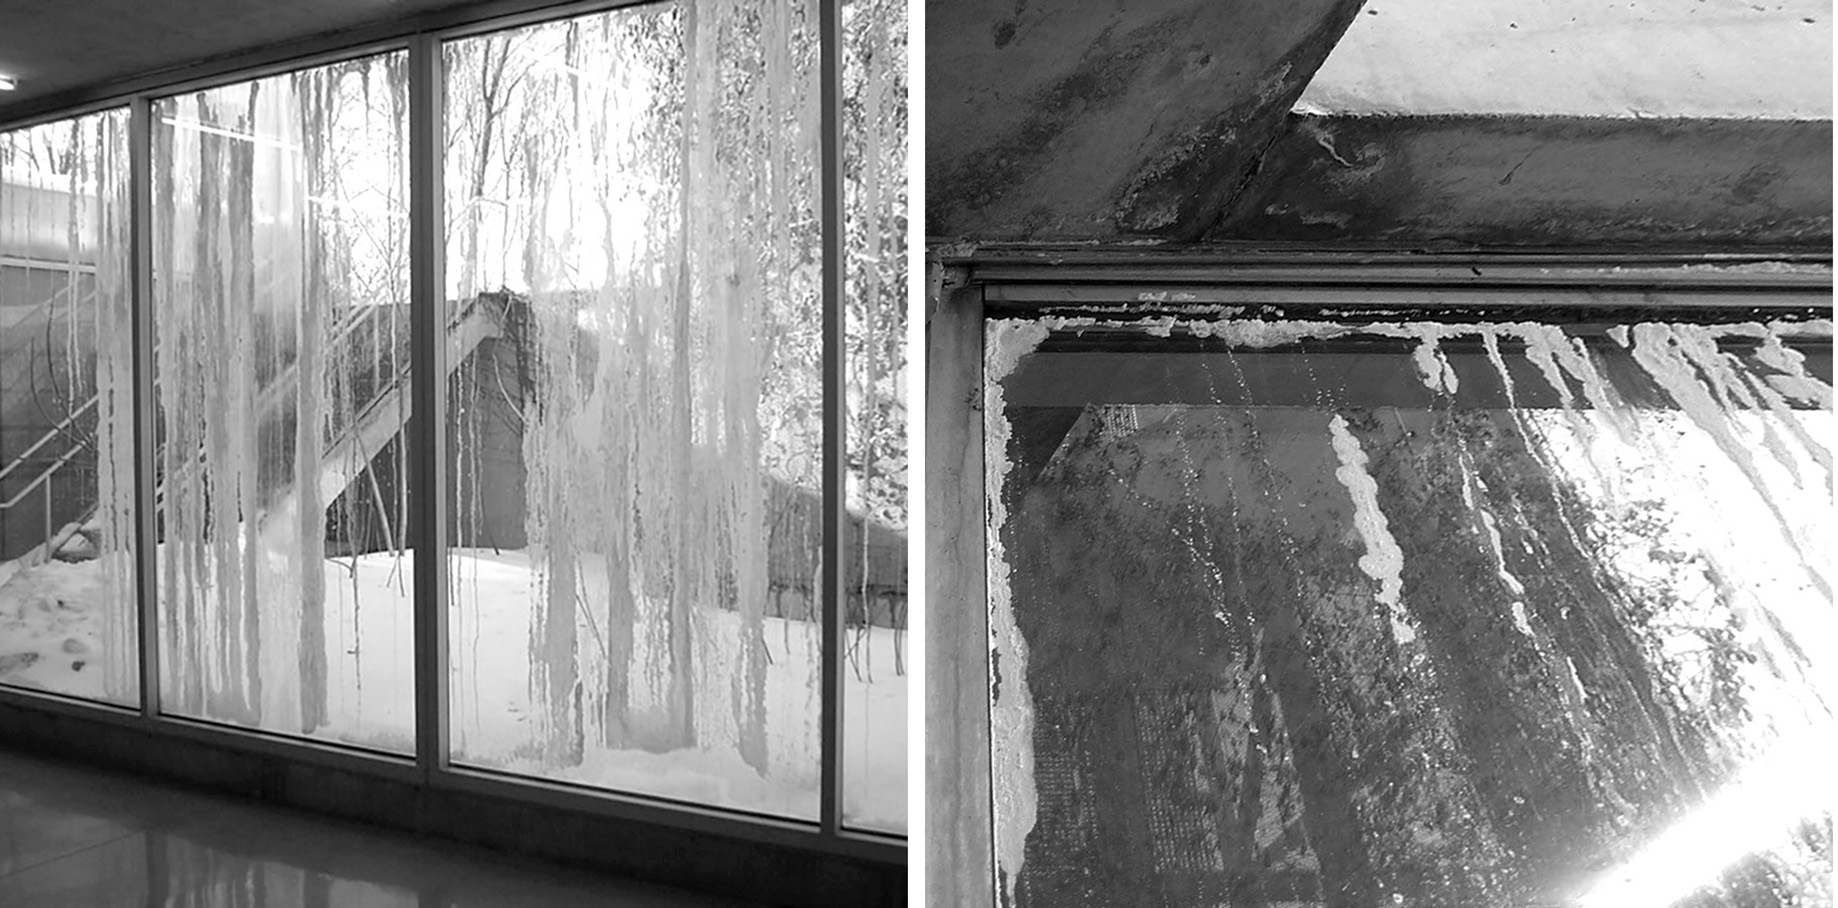 Gallery curtain wall viewed from inside covered with white efflorescence stains.